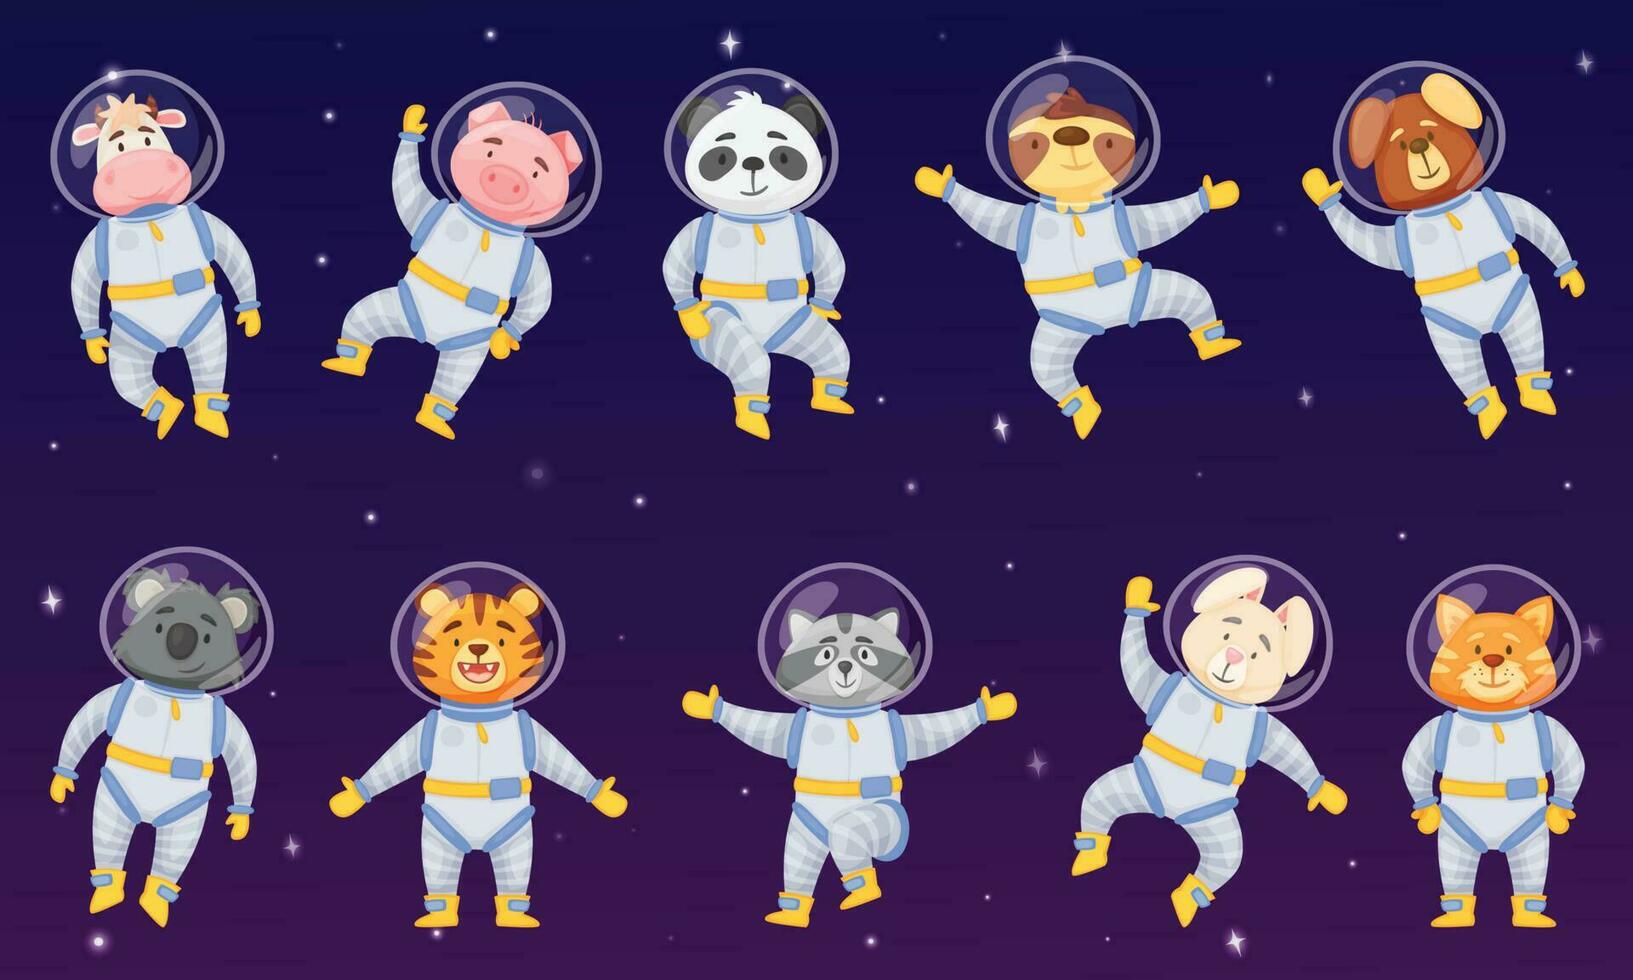 Cartoon animal astronauts, cute animals in space suits. Funny panda, dog, raccoon, tiger, koala character flying in outer space vector set